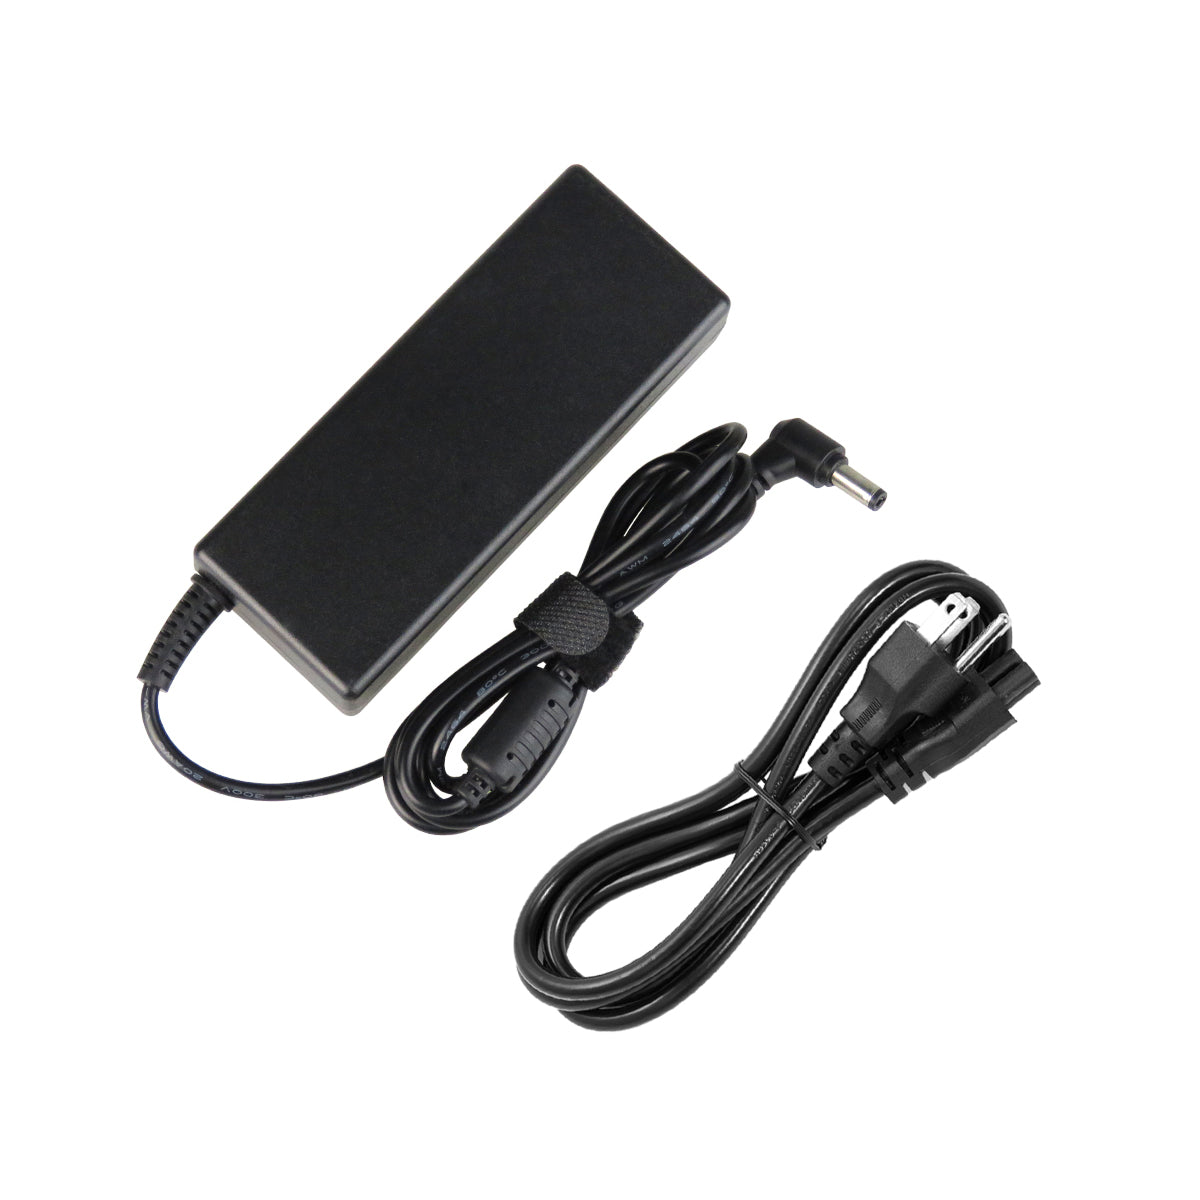 AC Adapter Charger for ASUS F7 Notebook.